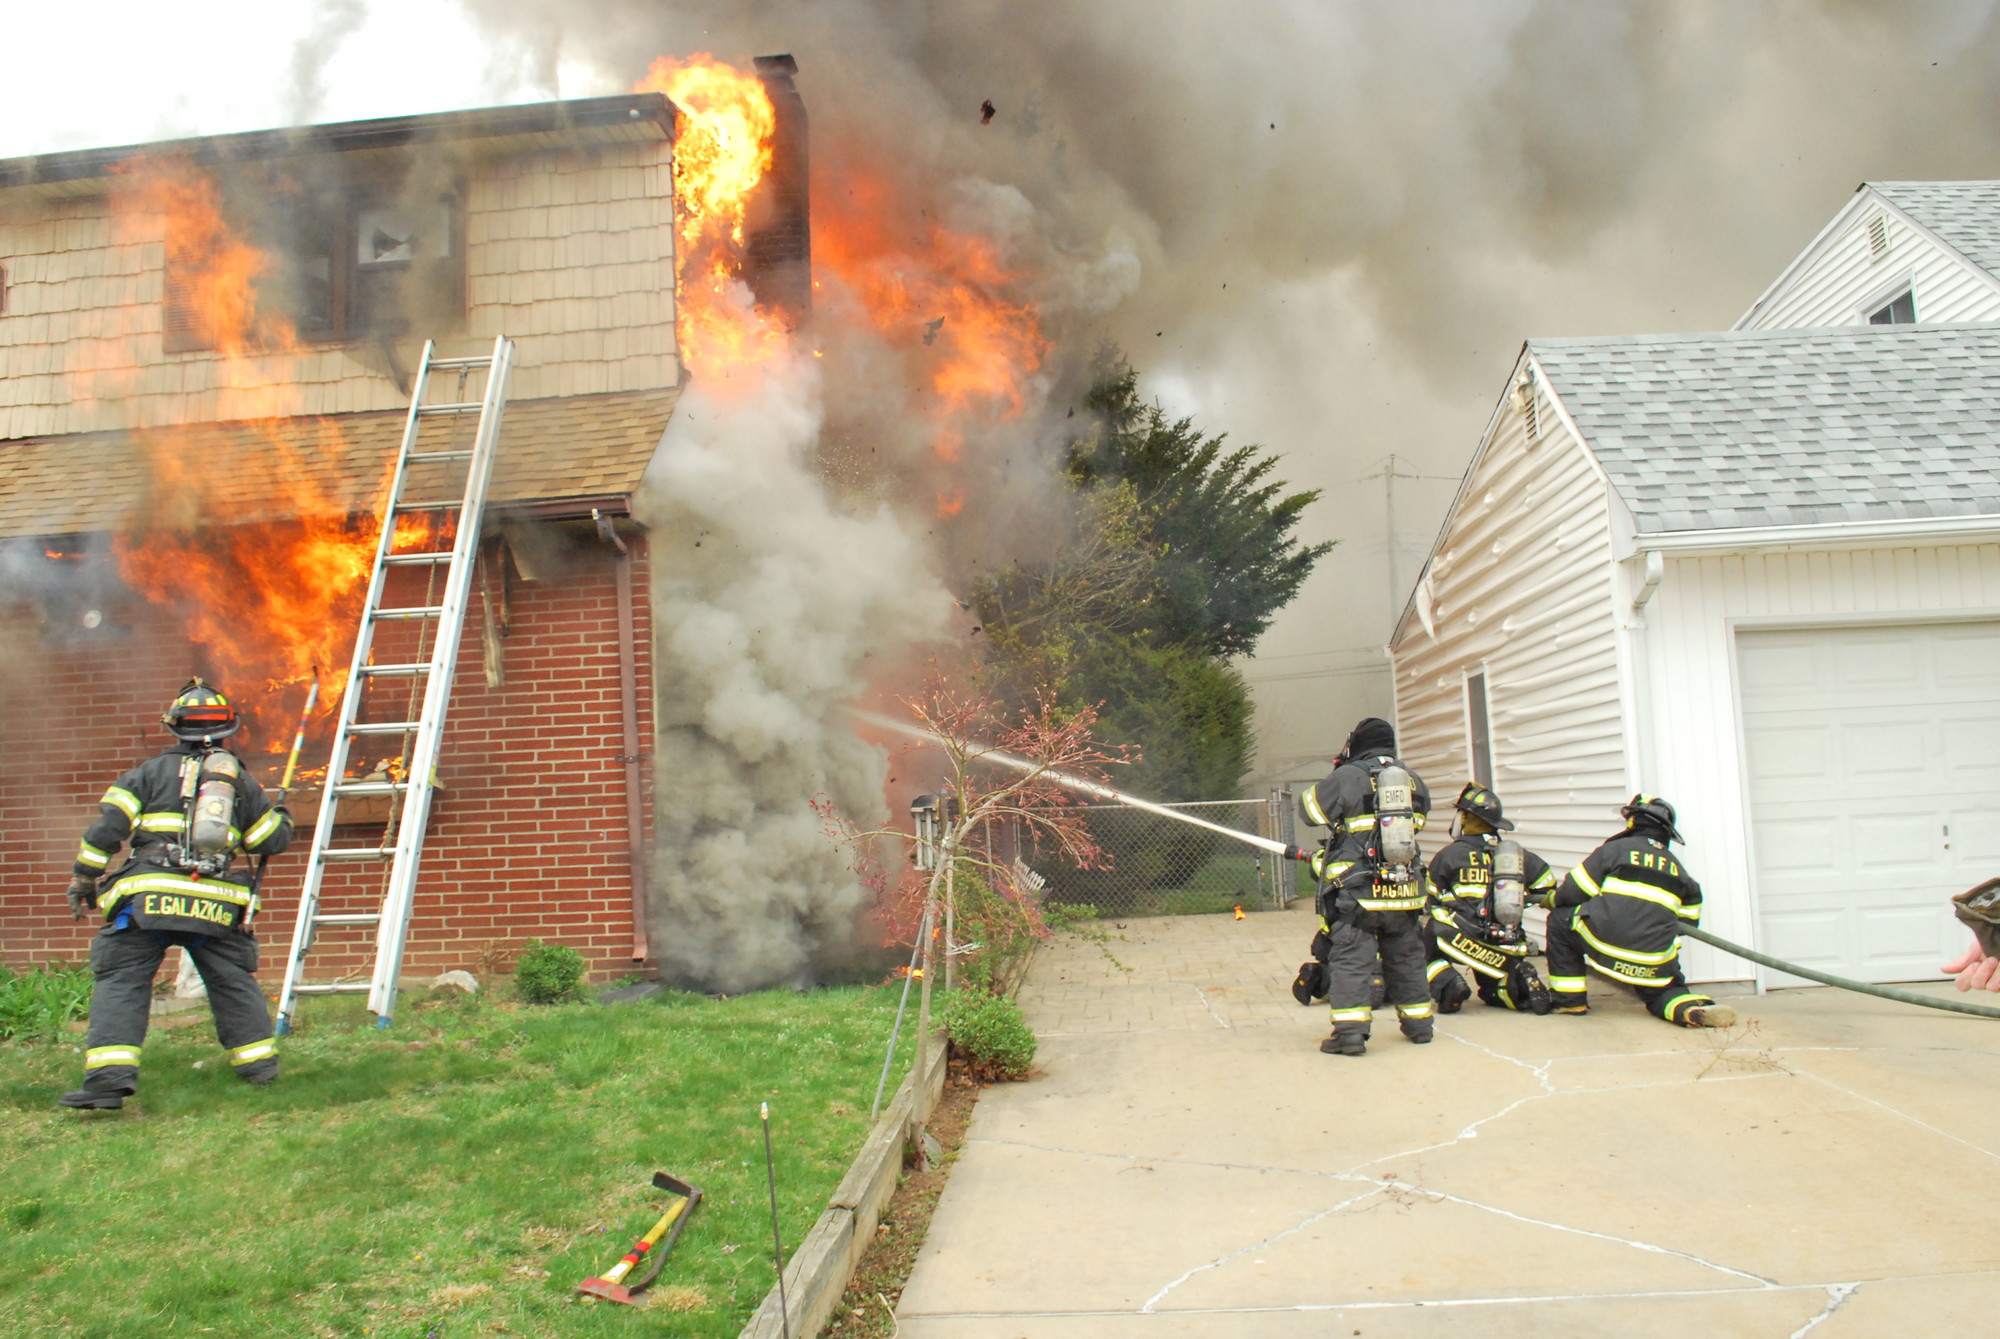 About 70 firefighters battled the blaze.